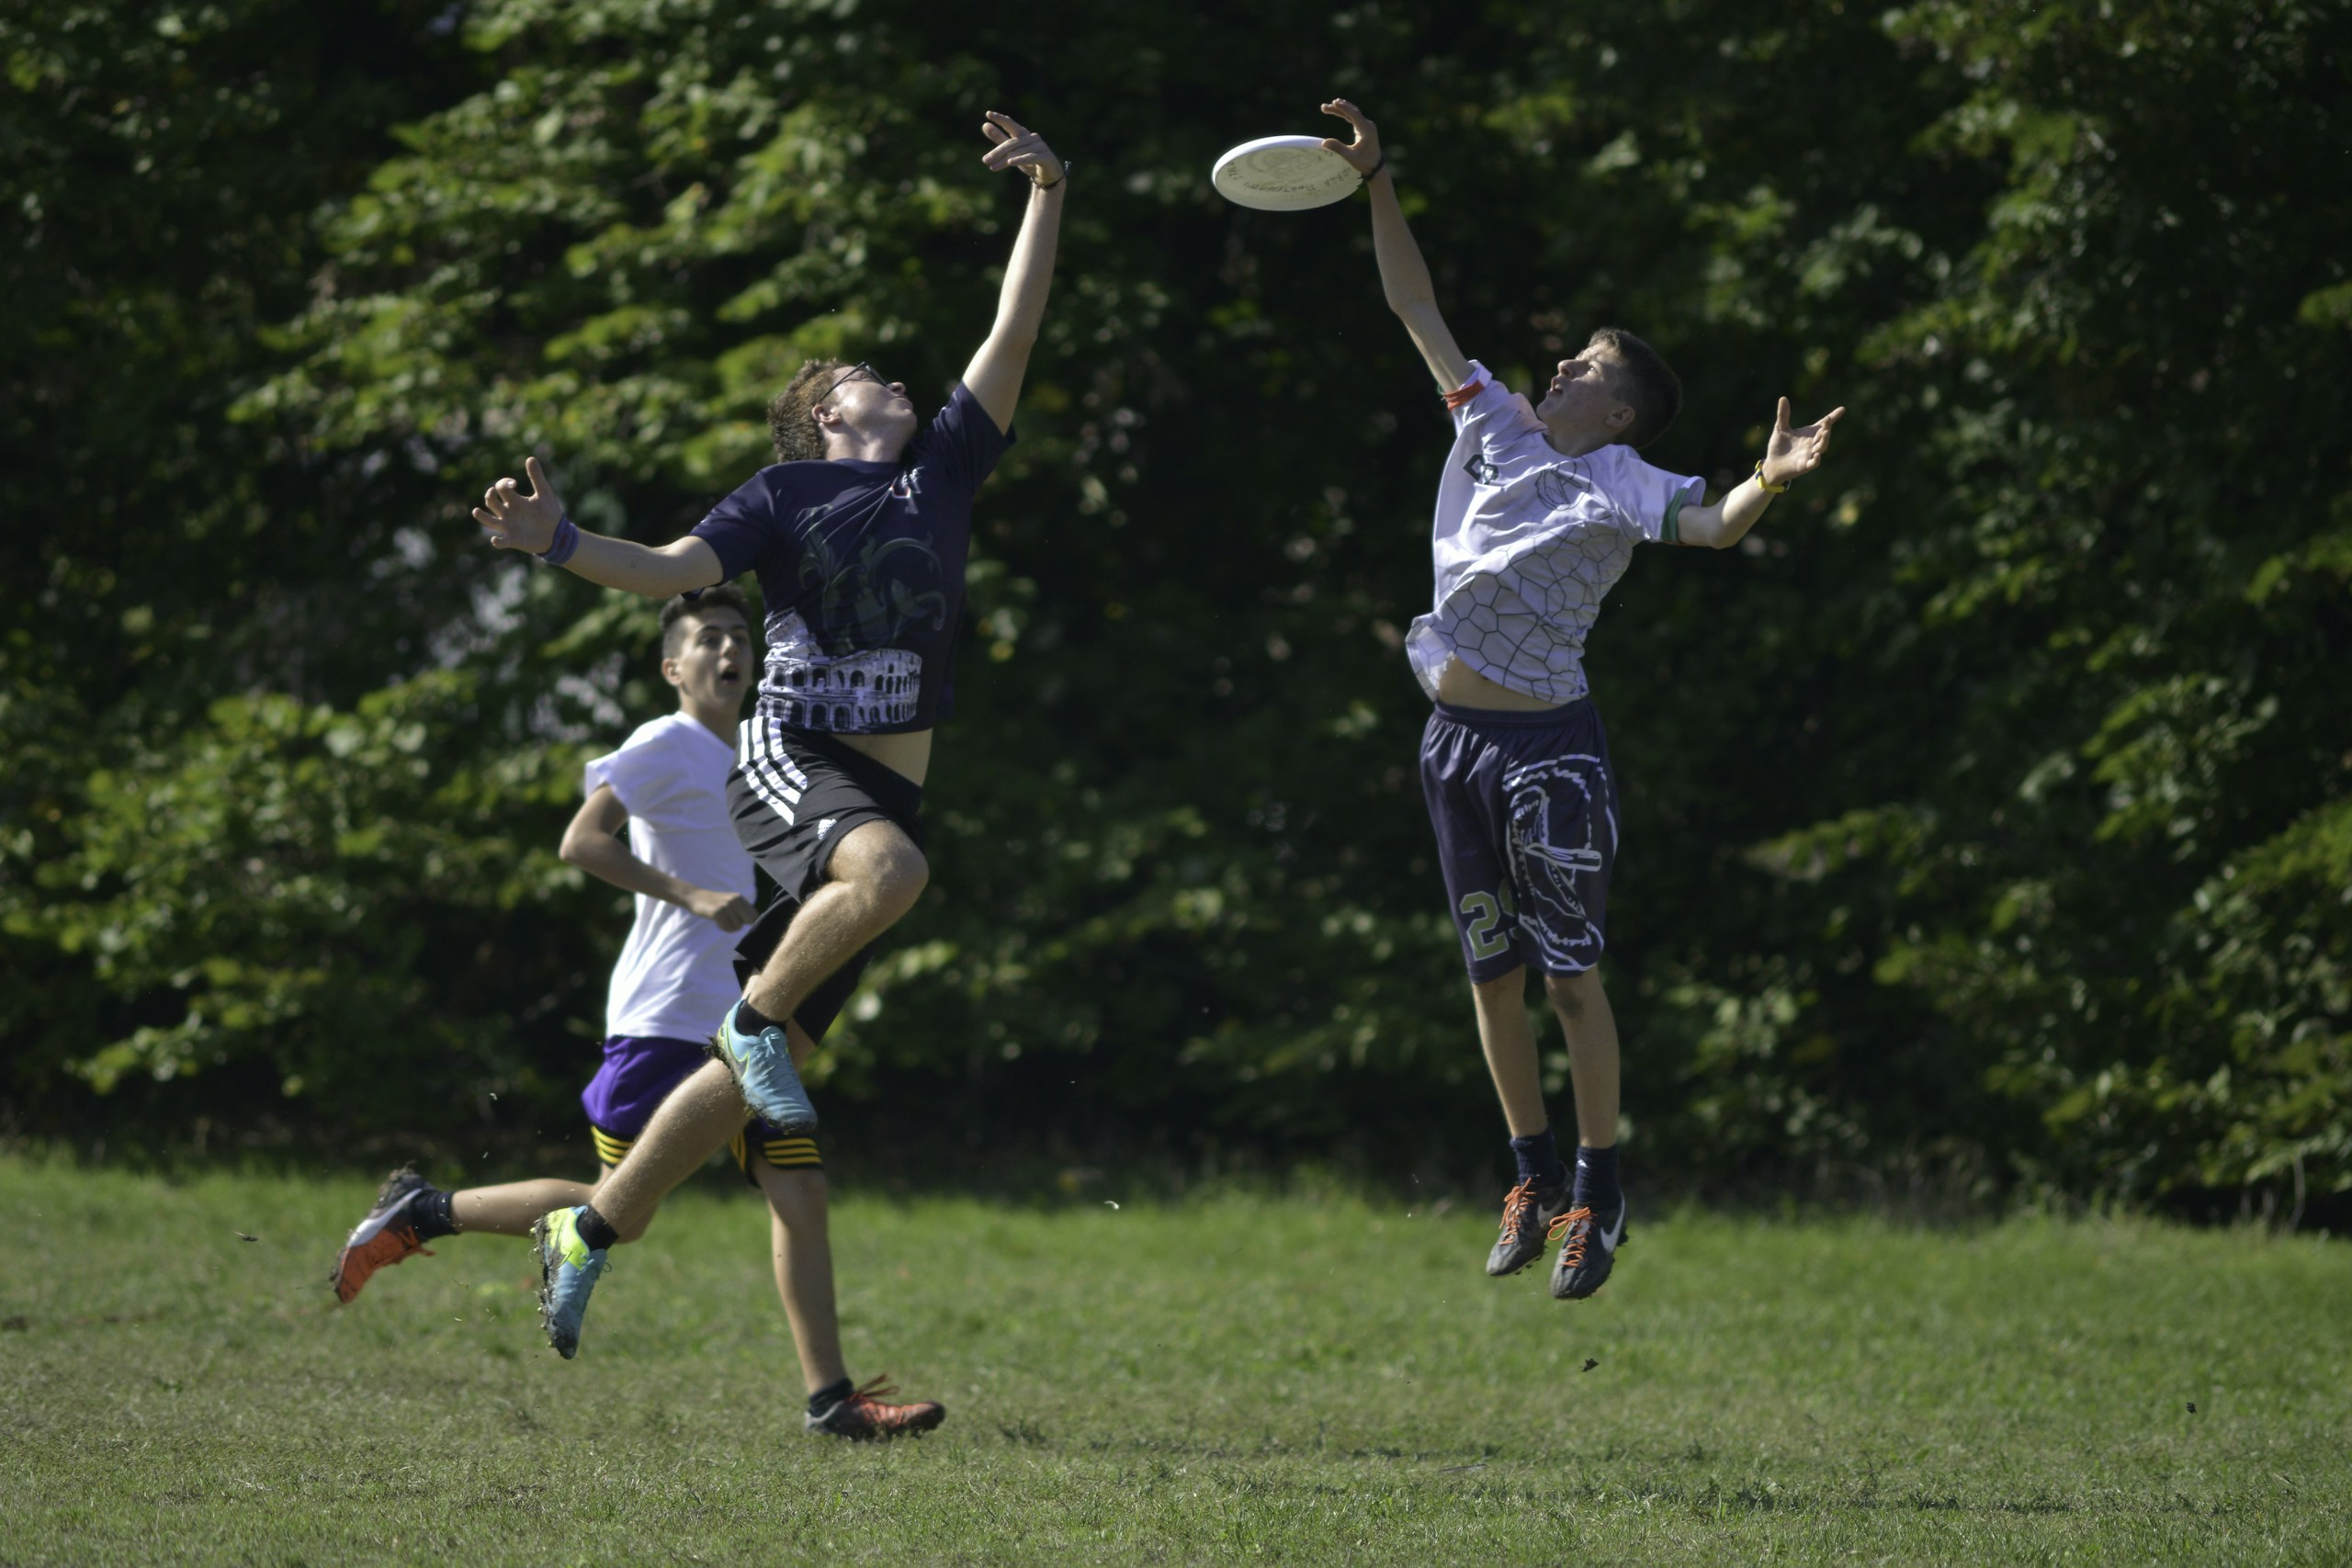 Sinis bendición Seleccione 2022 World Masters Ultimate Frisbee Championships coming to Limerick